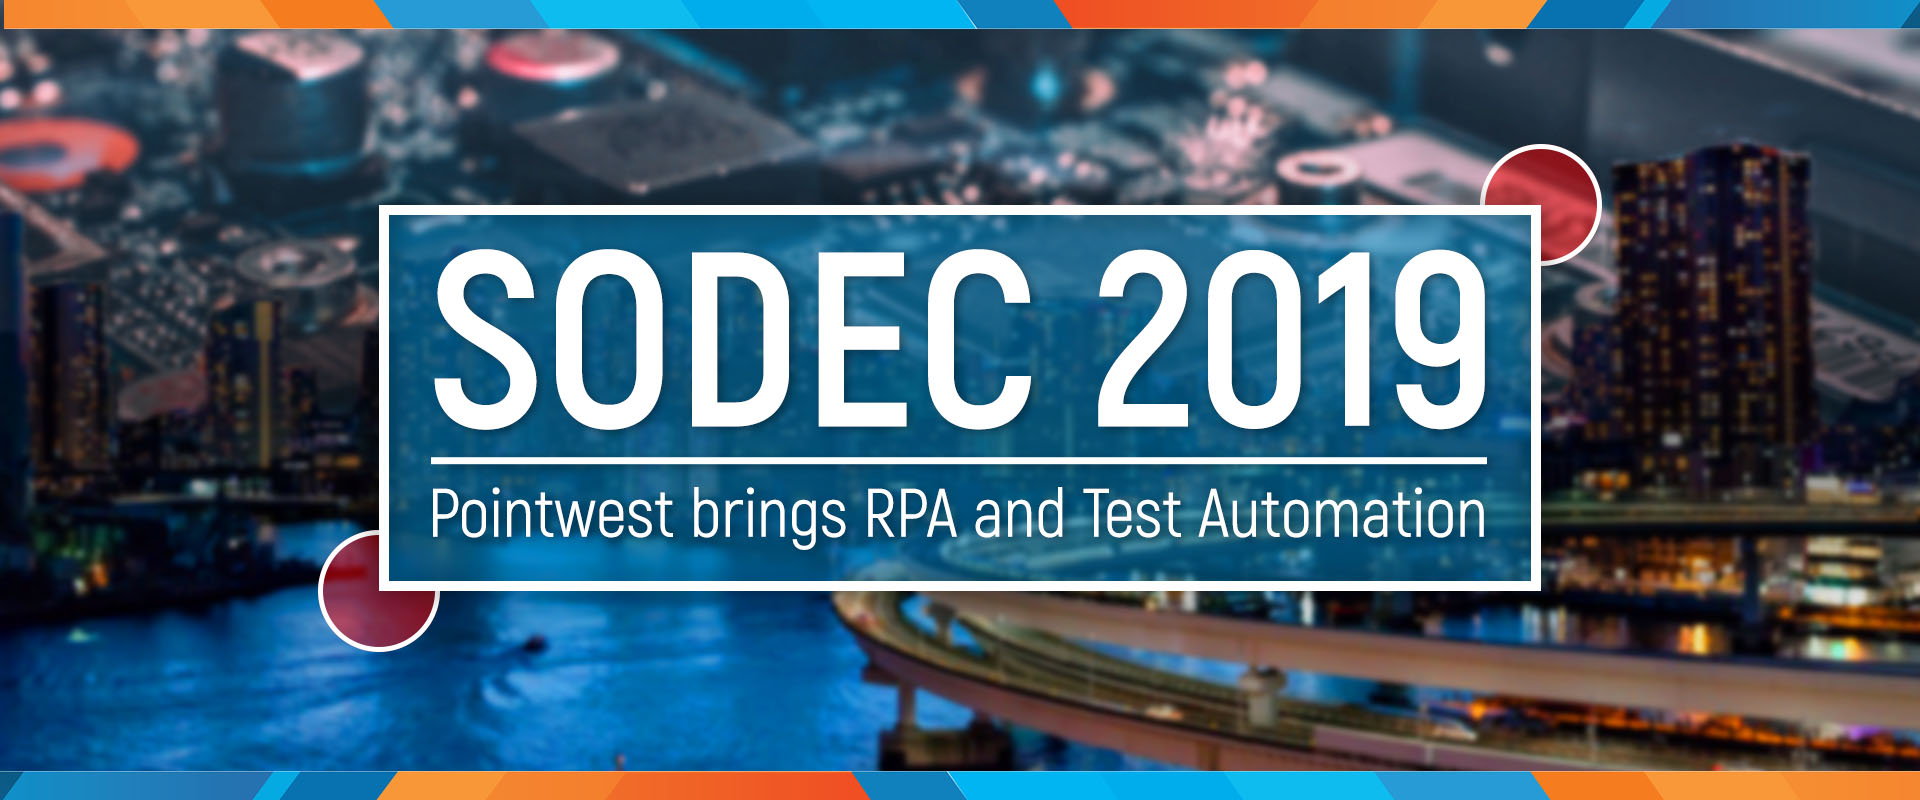 Pointwest In SODEC 2019 Offers RPA Test Automation Pointwest